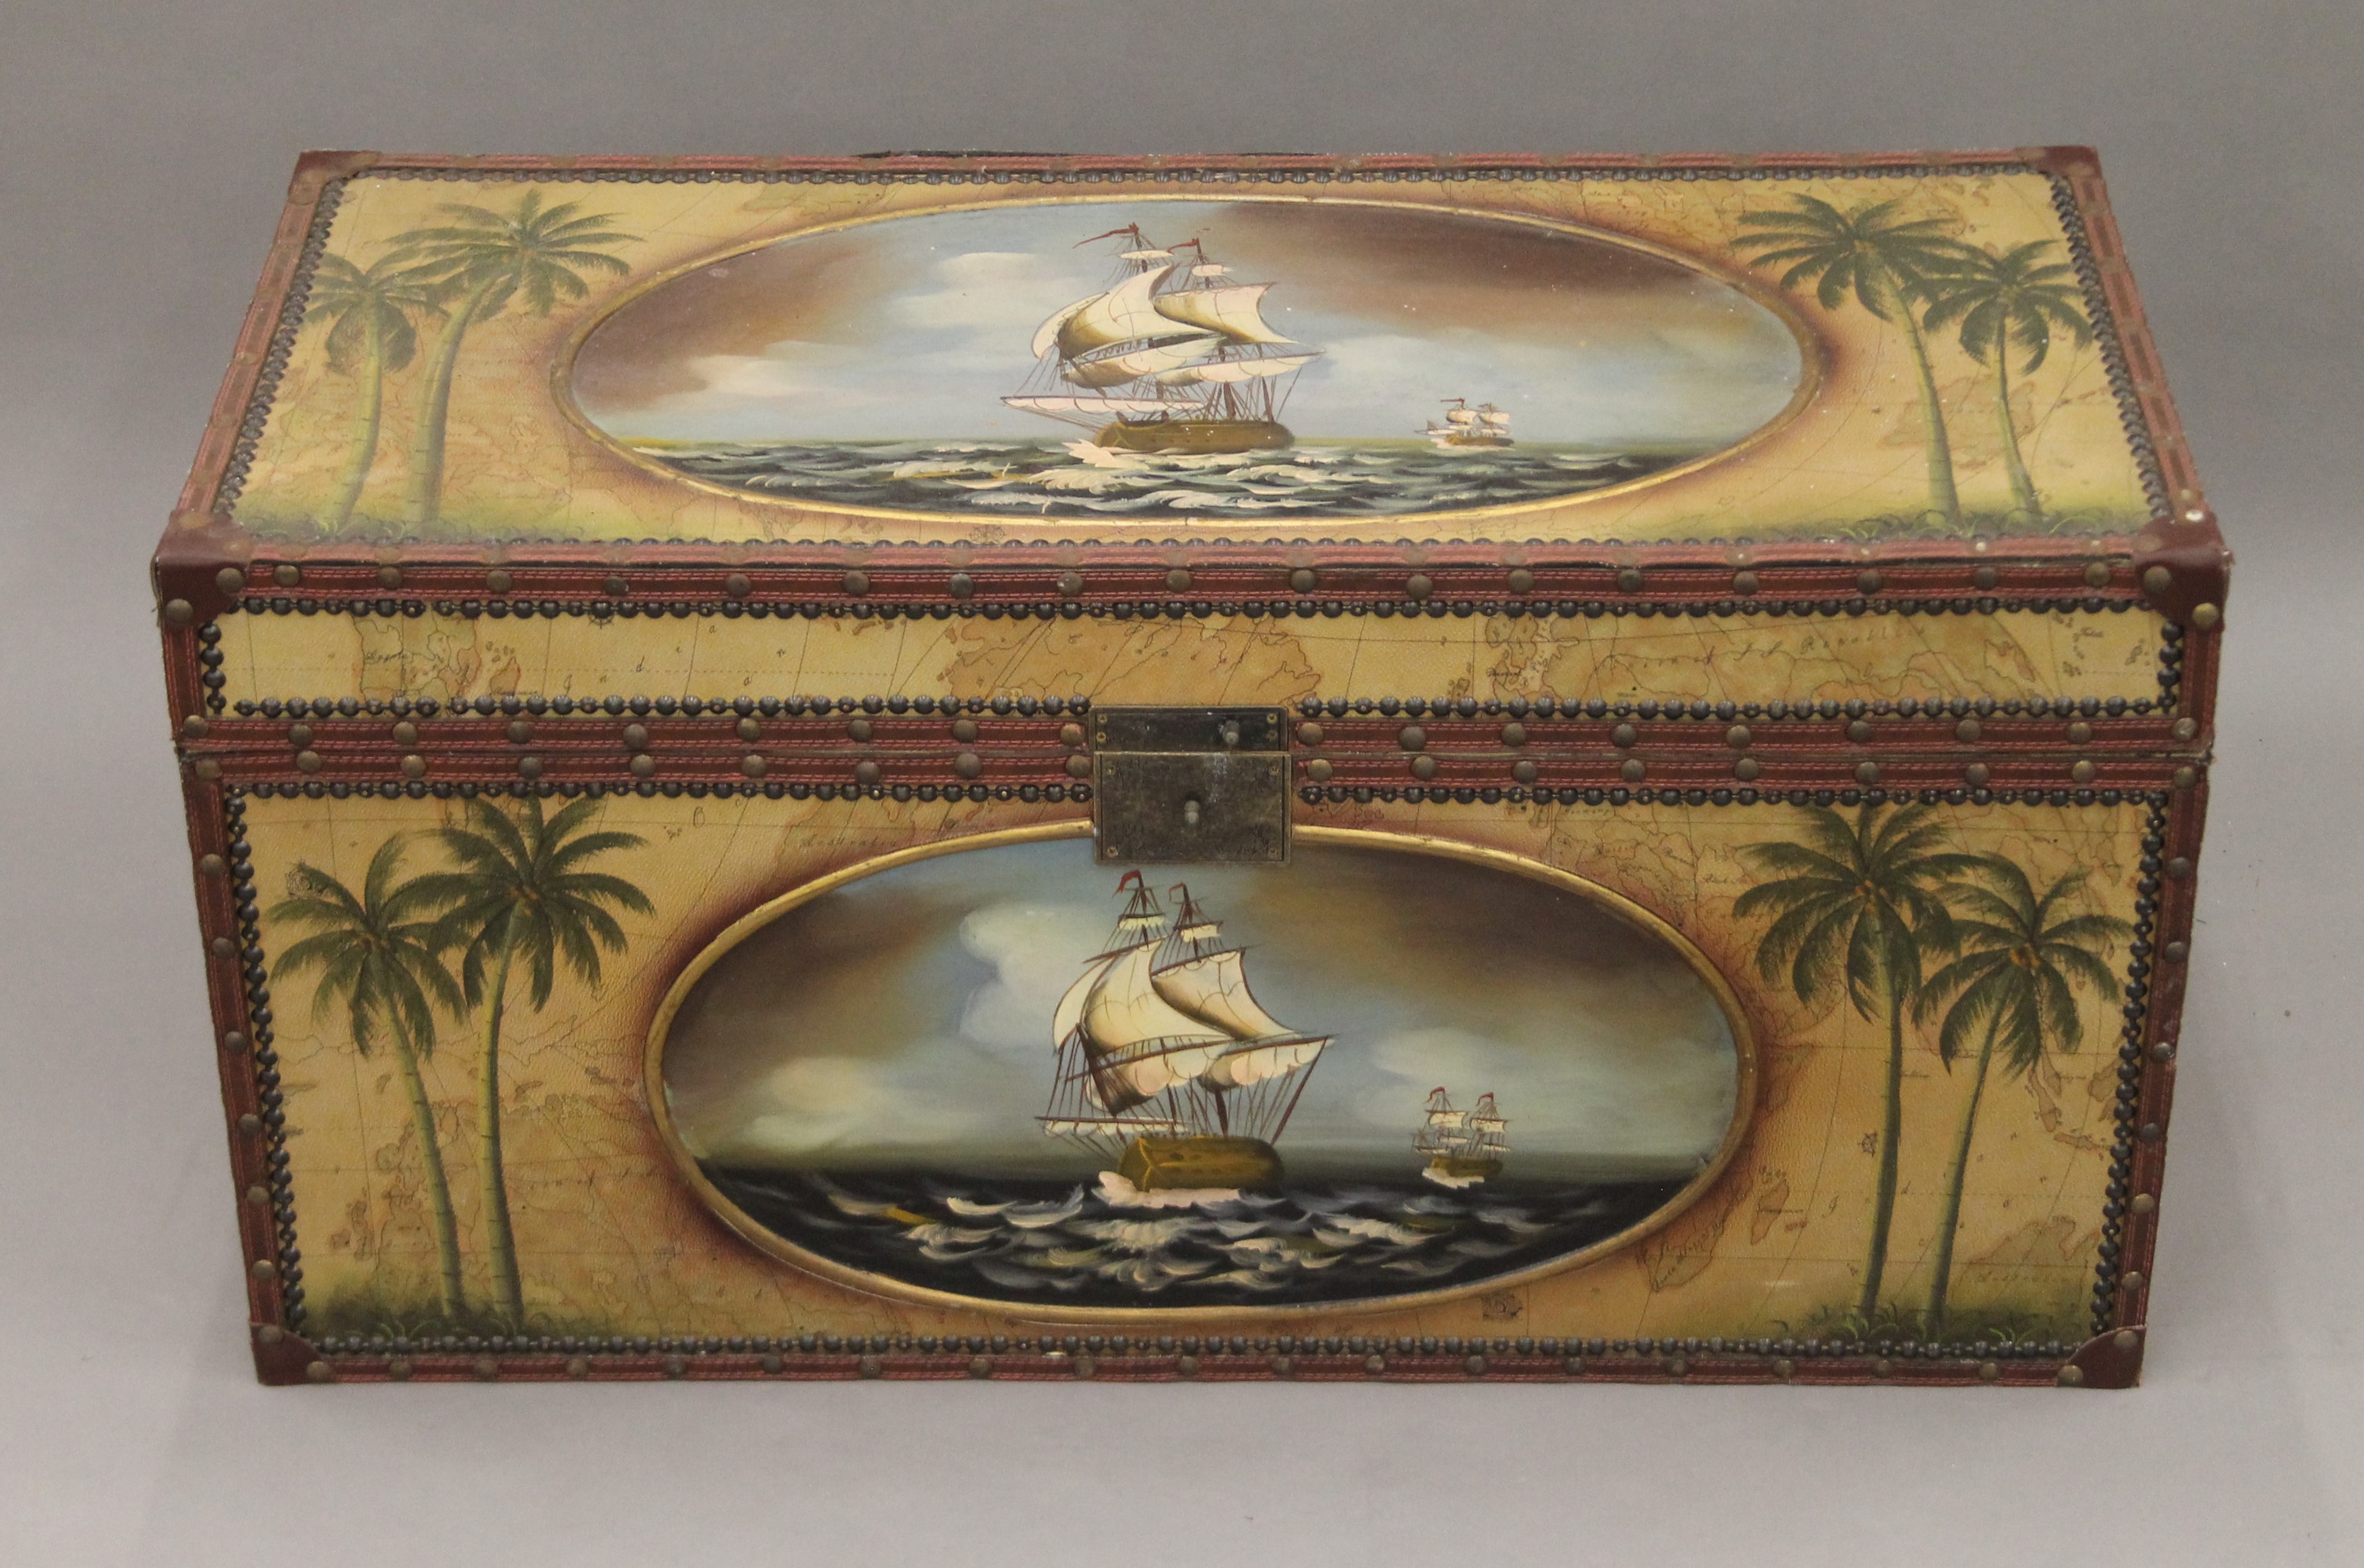 A trunk decorated with ships. 86 cm wide.